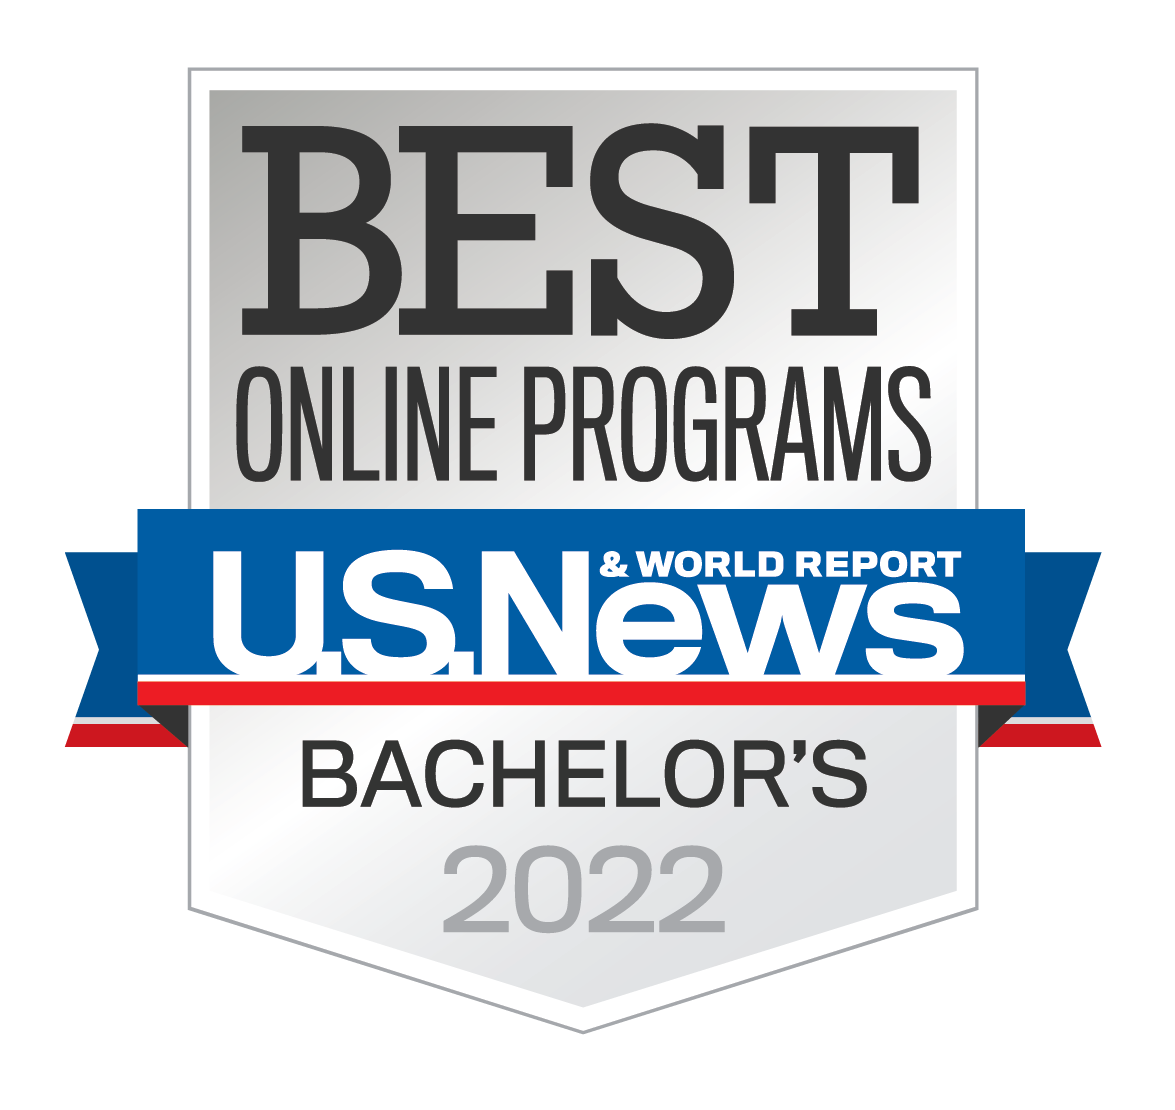 Best Online Programs - US News and World Report - Bachelors 2022